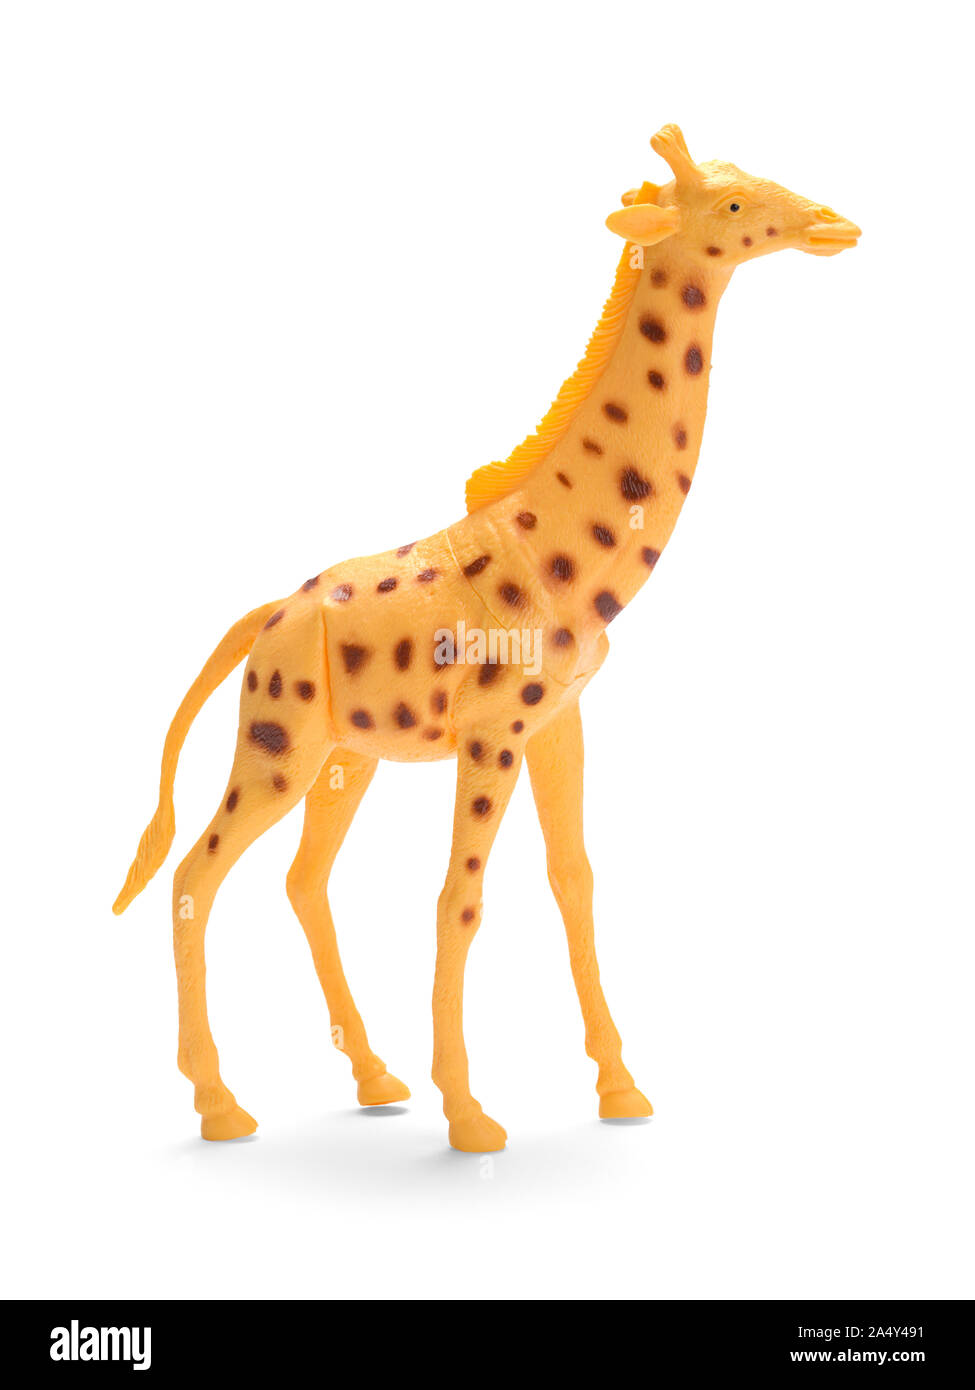 Plastic Toy Giraffe Side View Isolated on White. Stock Photo